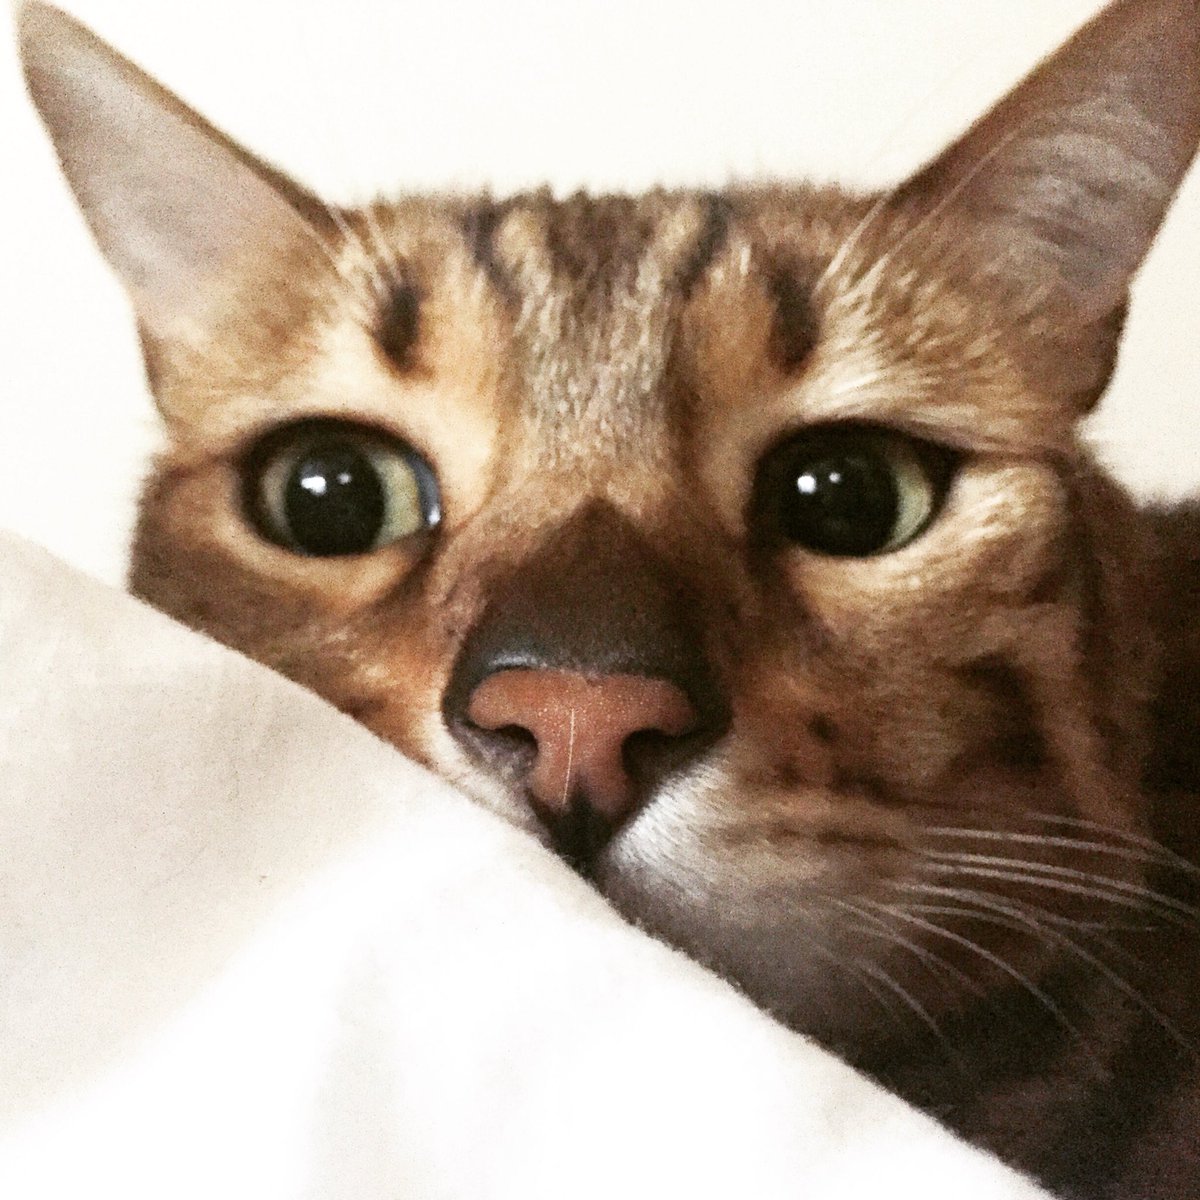 🐾 #meowmy loves that expression so much !!! 👀💓 #joeybengalcat ma petite #gueuledamour #bengalcat #instacat #catsofinstagram #catsagram #catsofig #bestmeow #magnificent_meowdels #cat_features #catseyes #cats_of_instagram #cats #greeneyes #catstagram